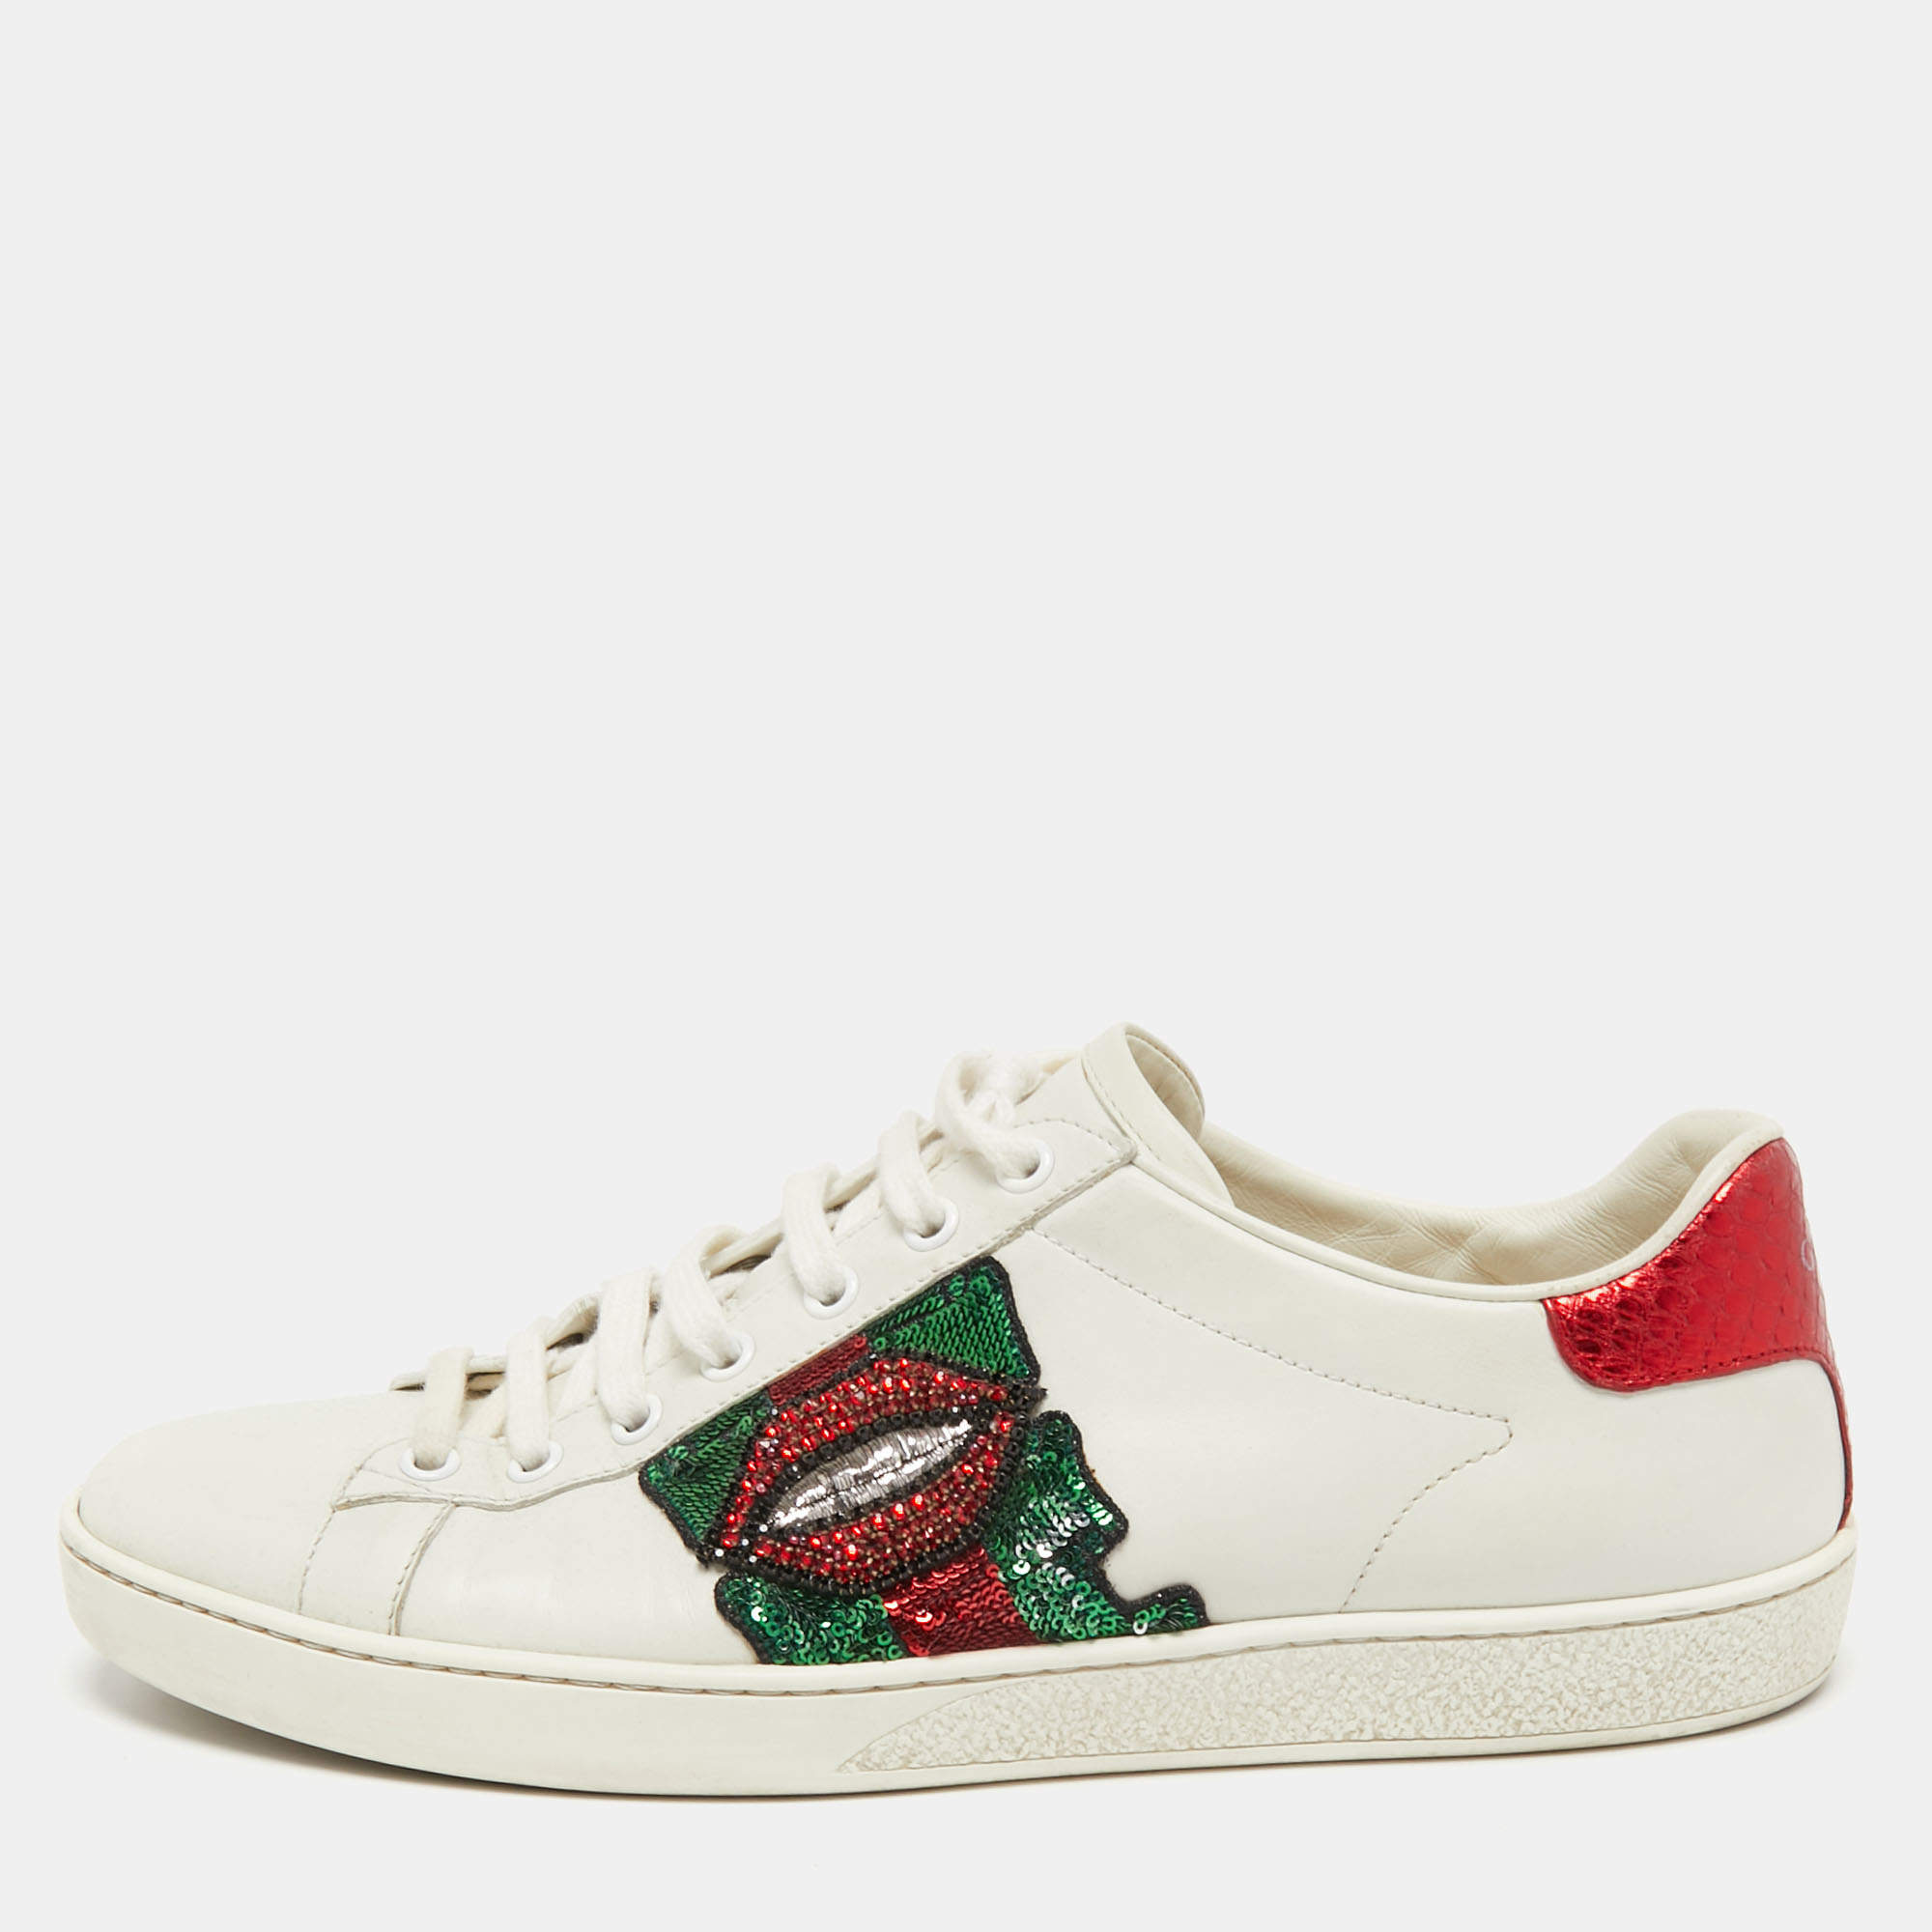 Gucci White Leather Sequin Lips Ace Low Top Sneakers Size 41 Gucci ...